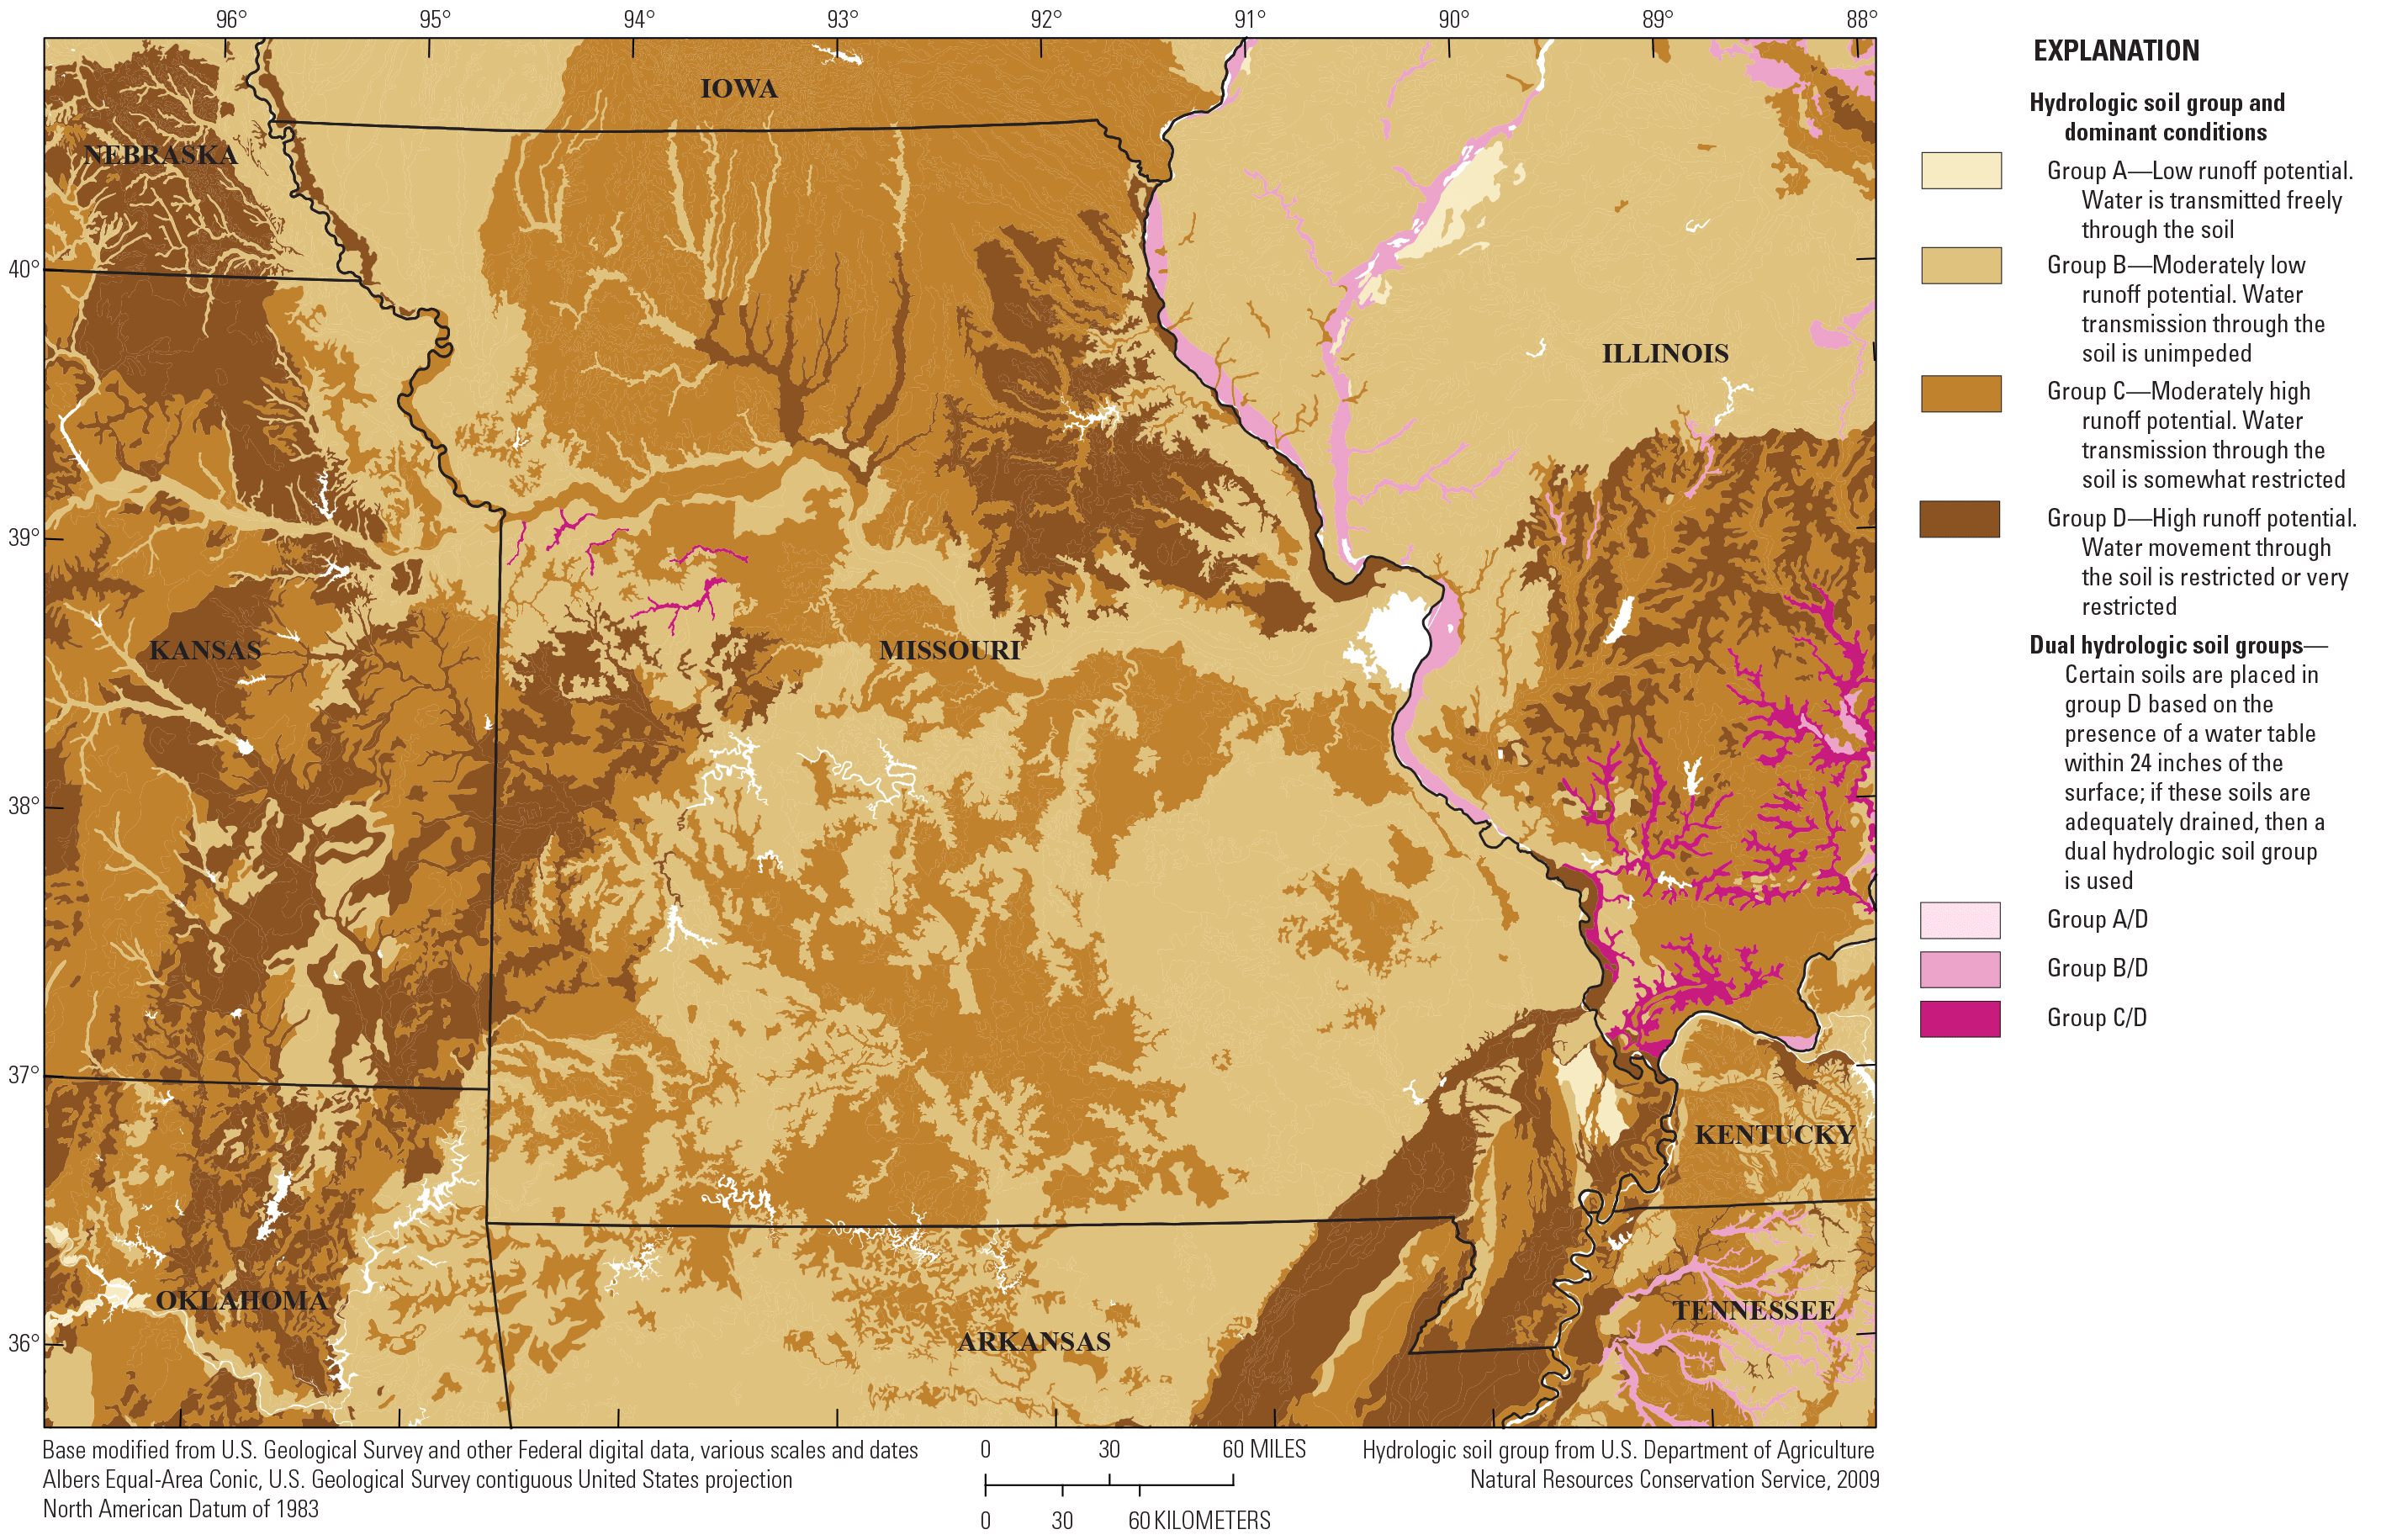 Hydrologic soil groups in Missouri, which vary throughout the state.